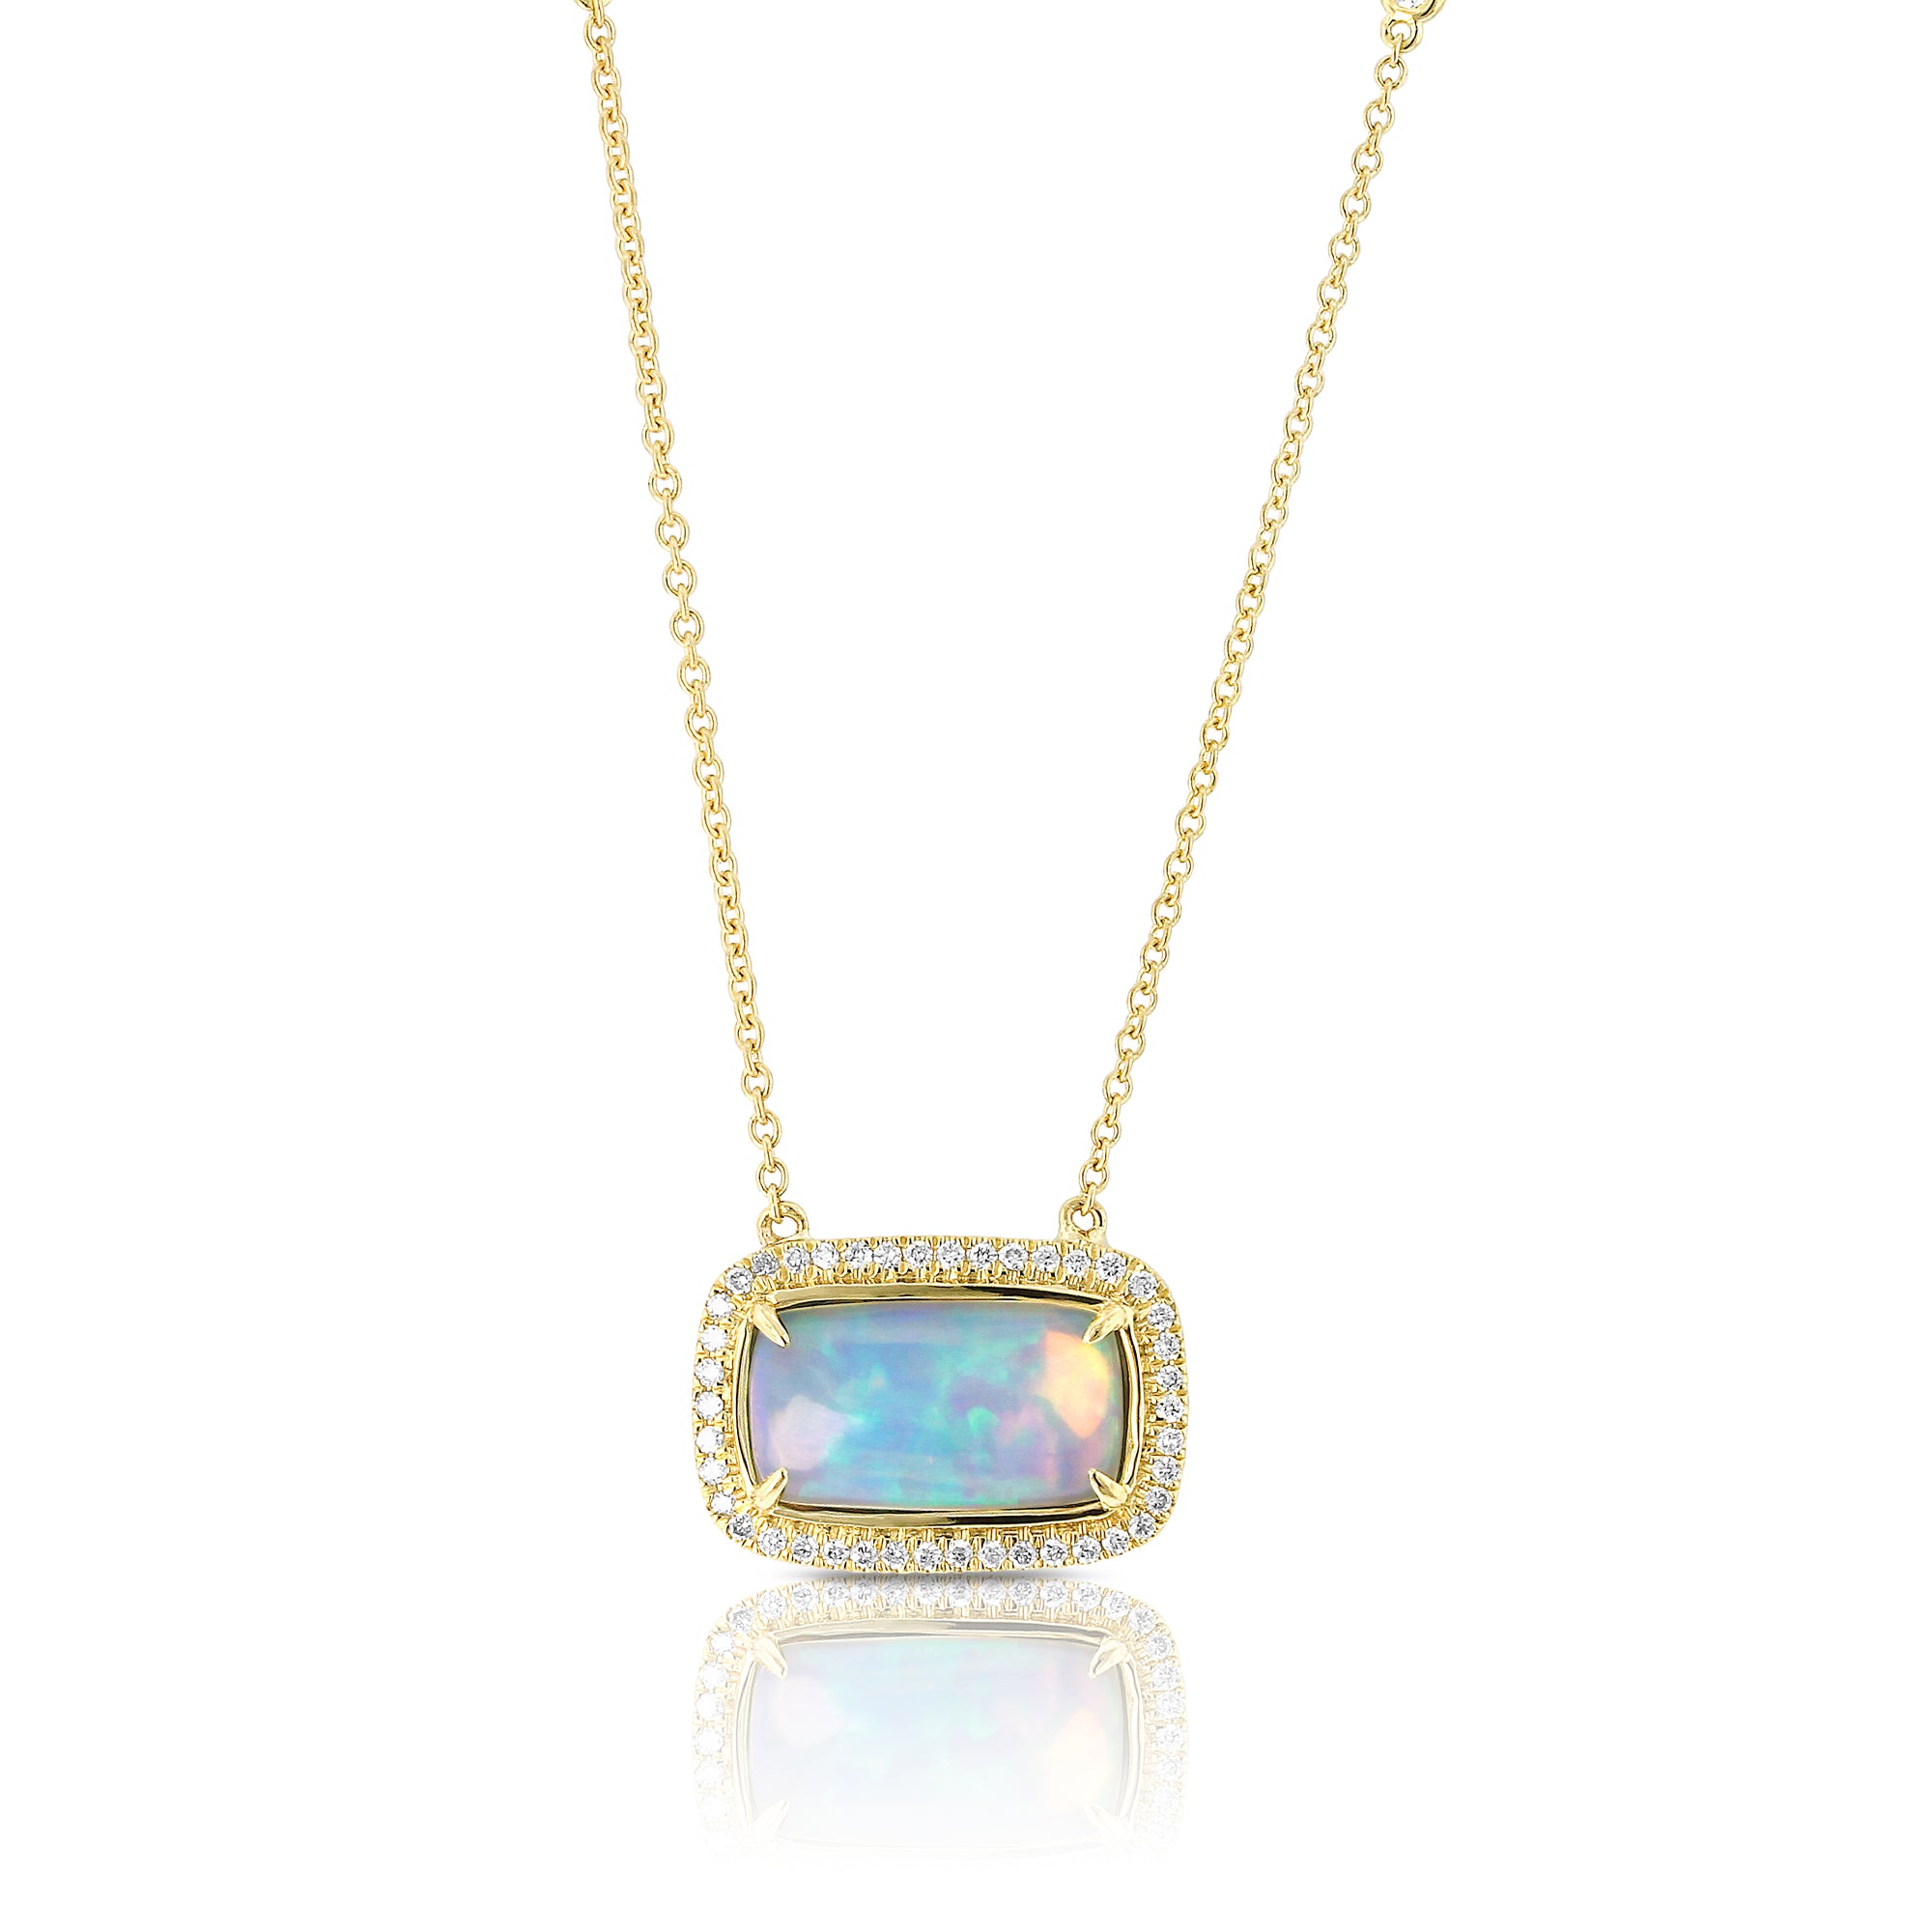 Rectangular White Opal and Diamond Necklace by Yael - Yellow Gold - Talisman Collection Fine Jewelers